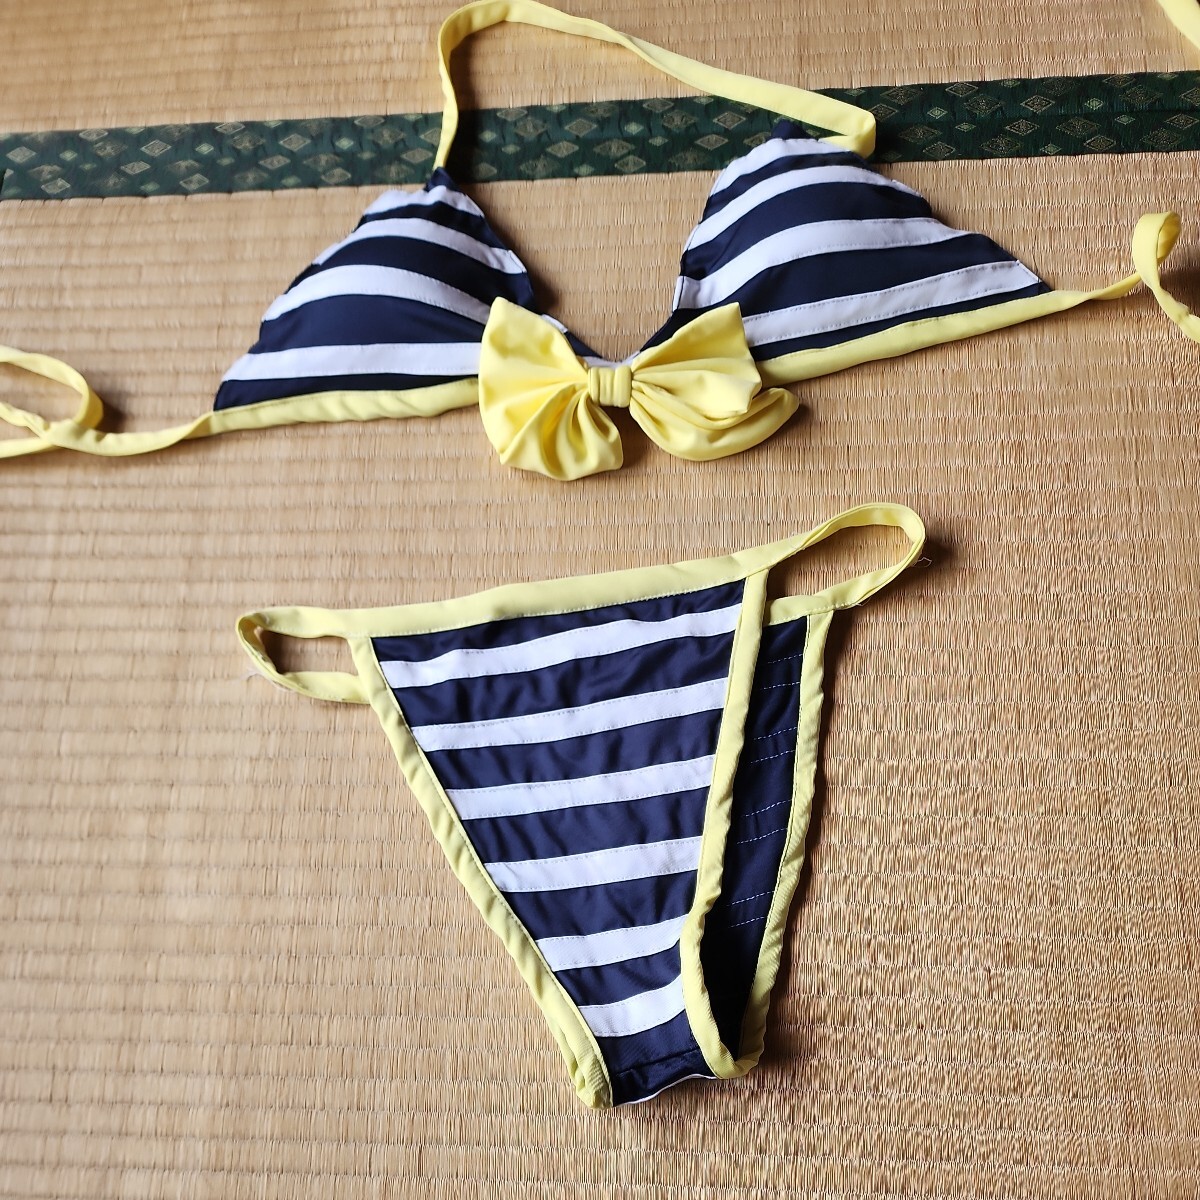 * tent Live .... swimsuit M, size same etc. one jpy start cosplay .. Home have been cleaned ( little fray . go out - )